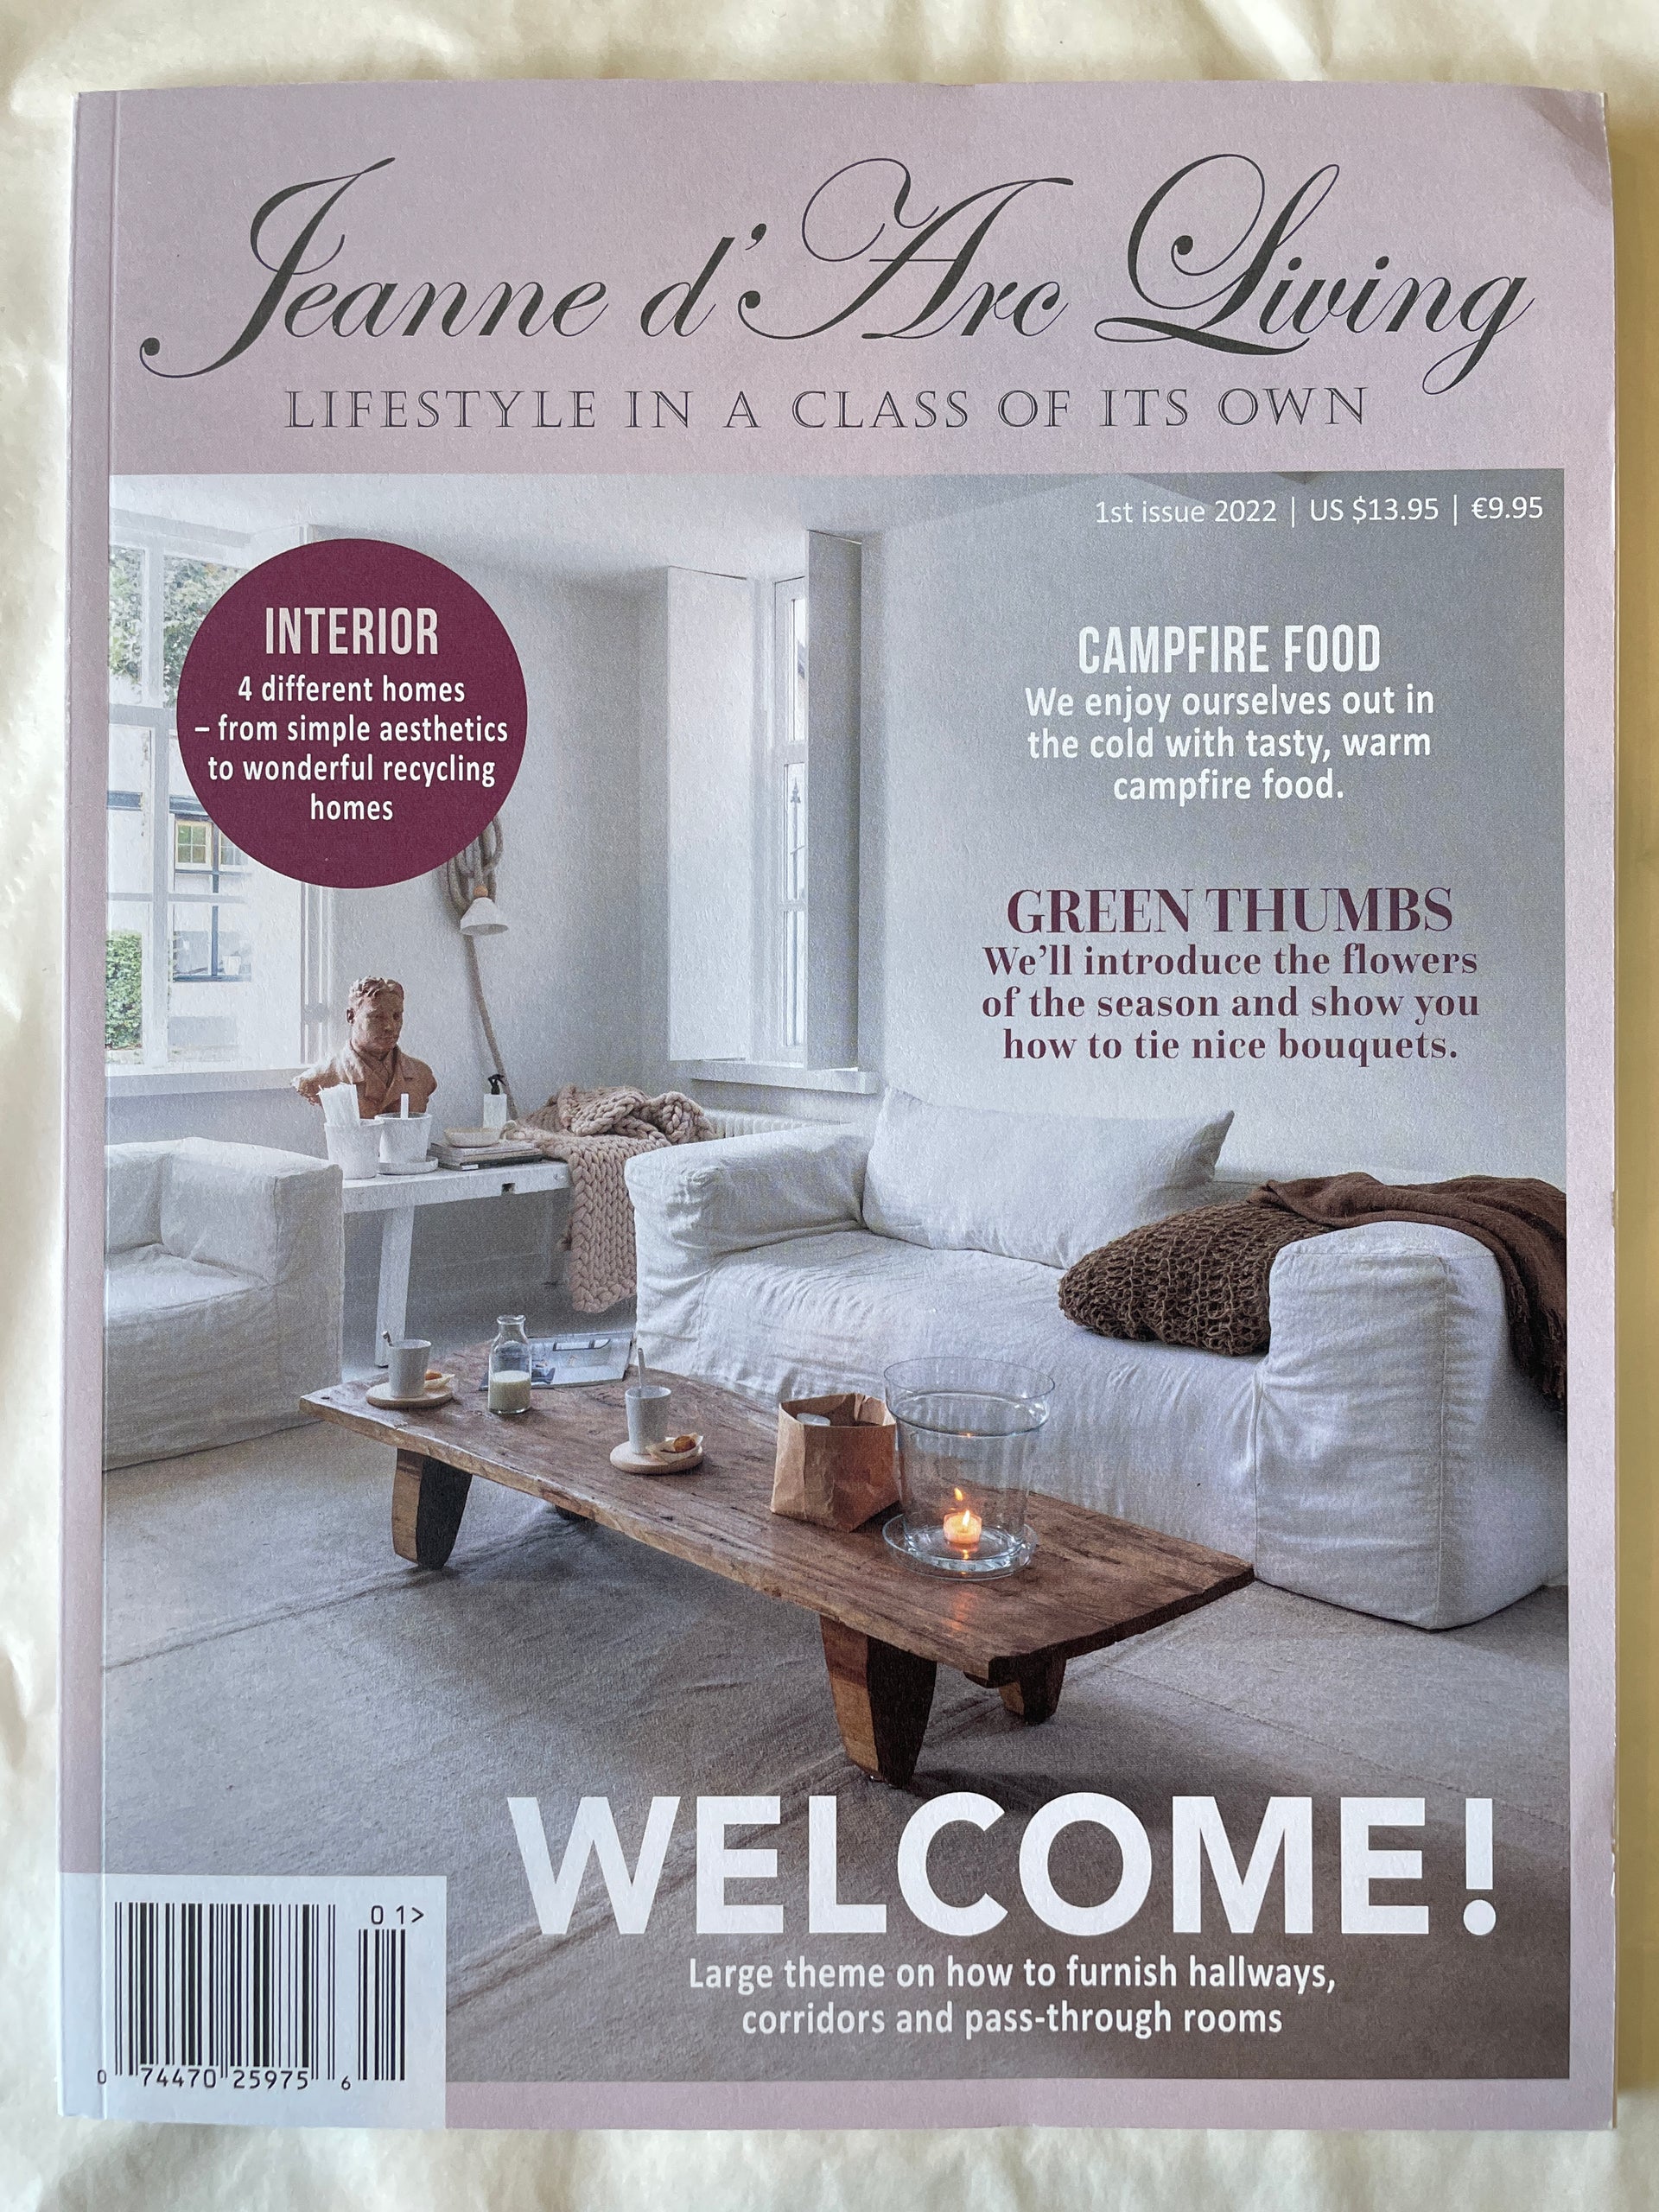 Jeanne d'Arc Living Magazine - 2022 Vol 1. Welcome